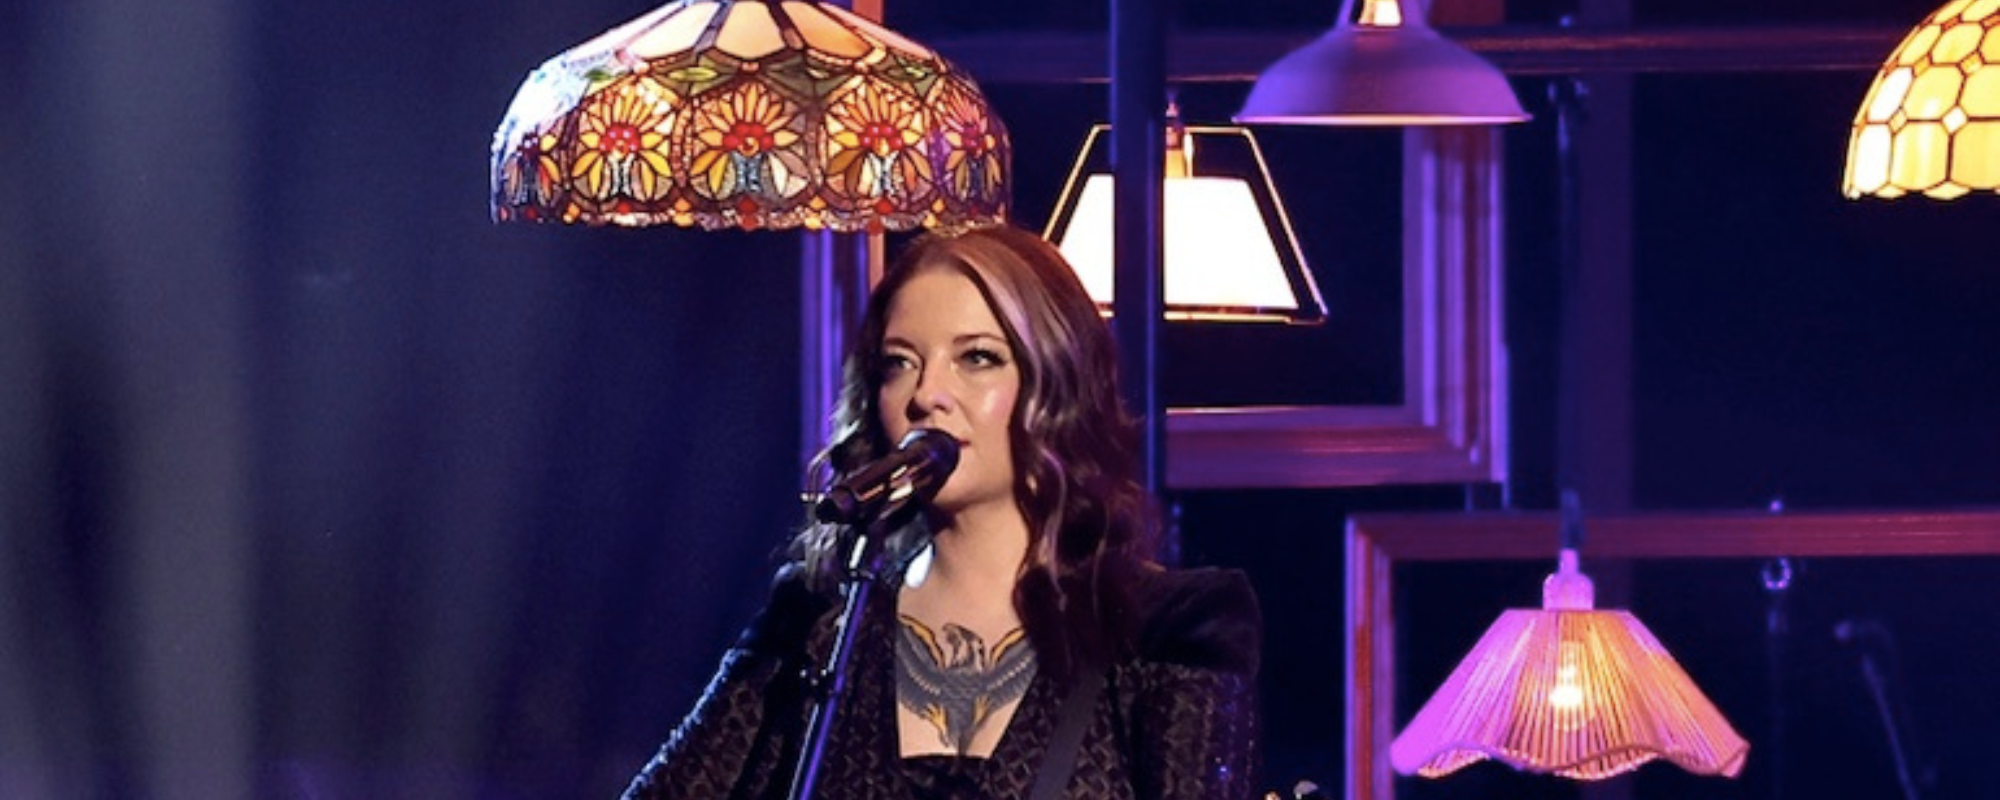 Watch: Ashley McBryde Performs “Light on in the Kitchen” at the 2023 CMA Awards